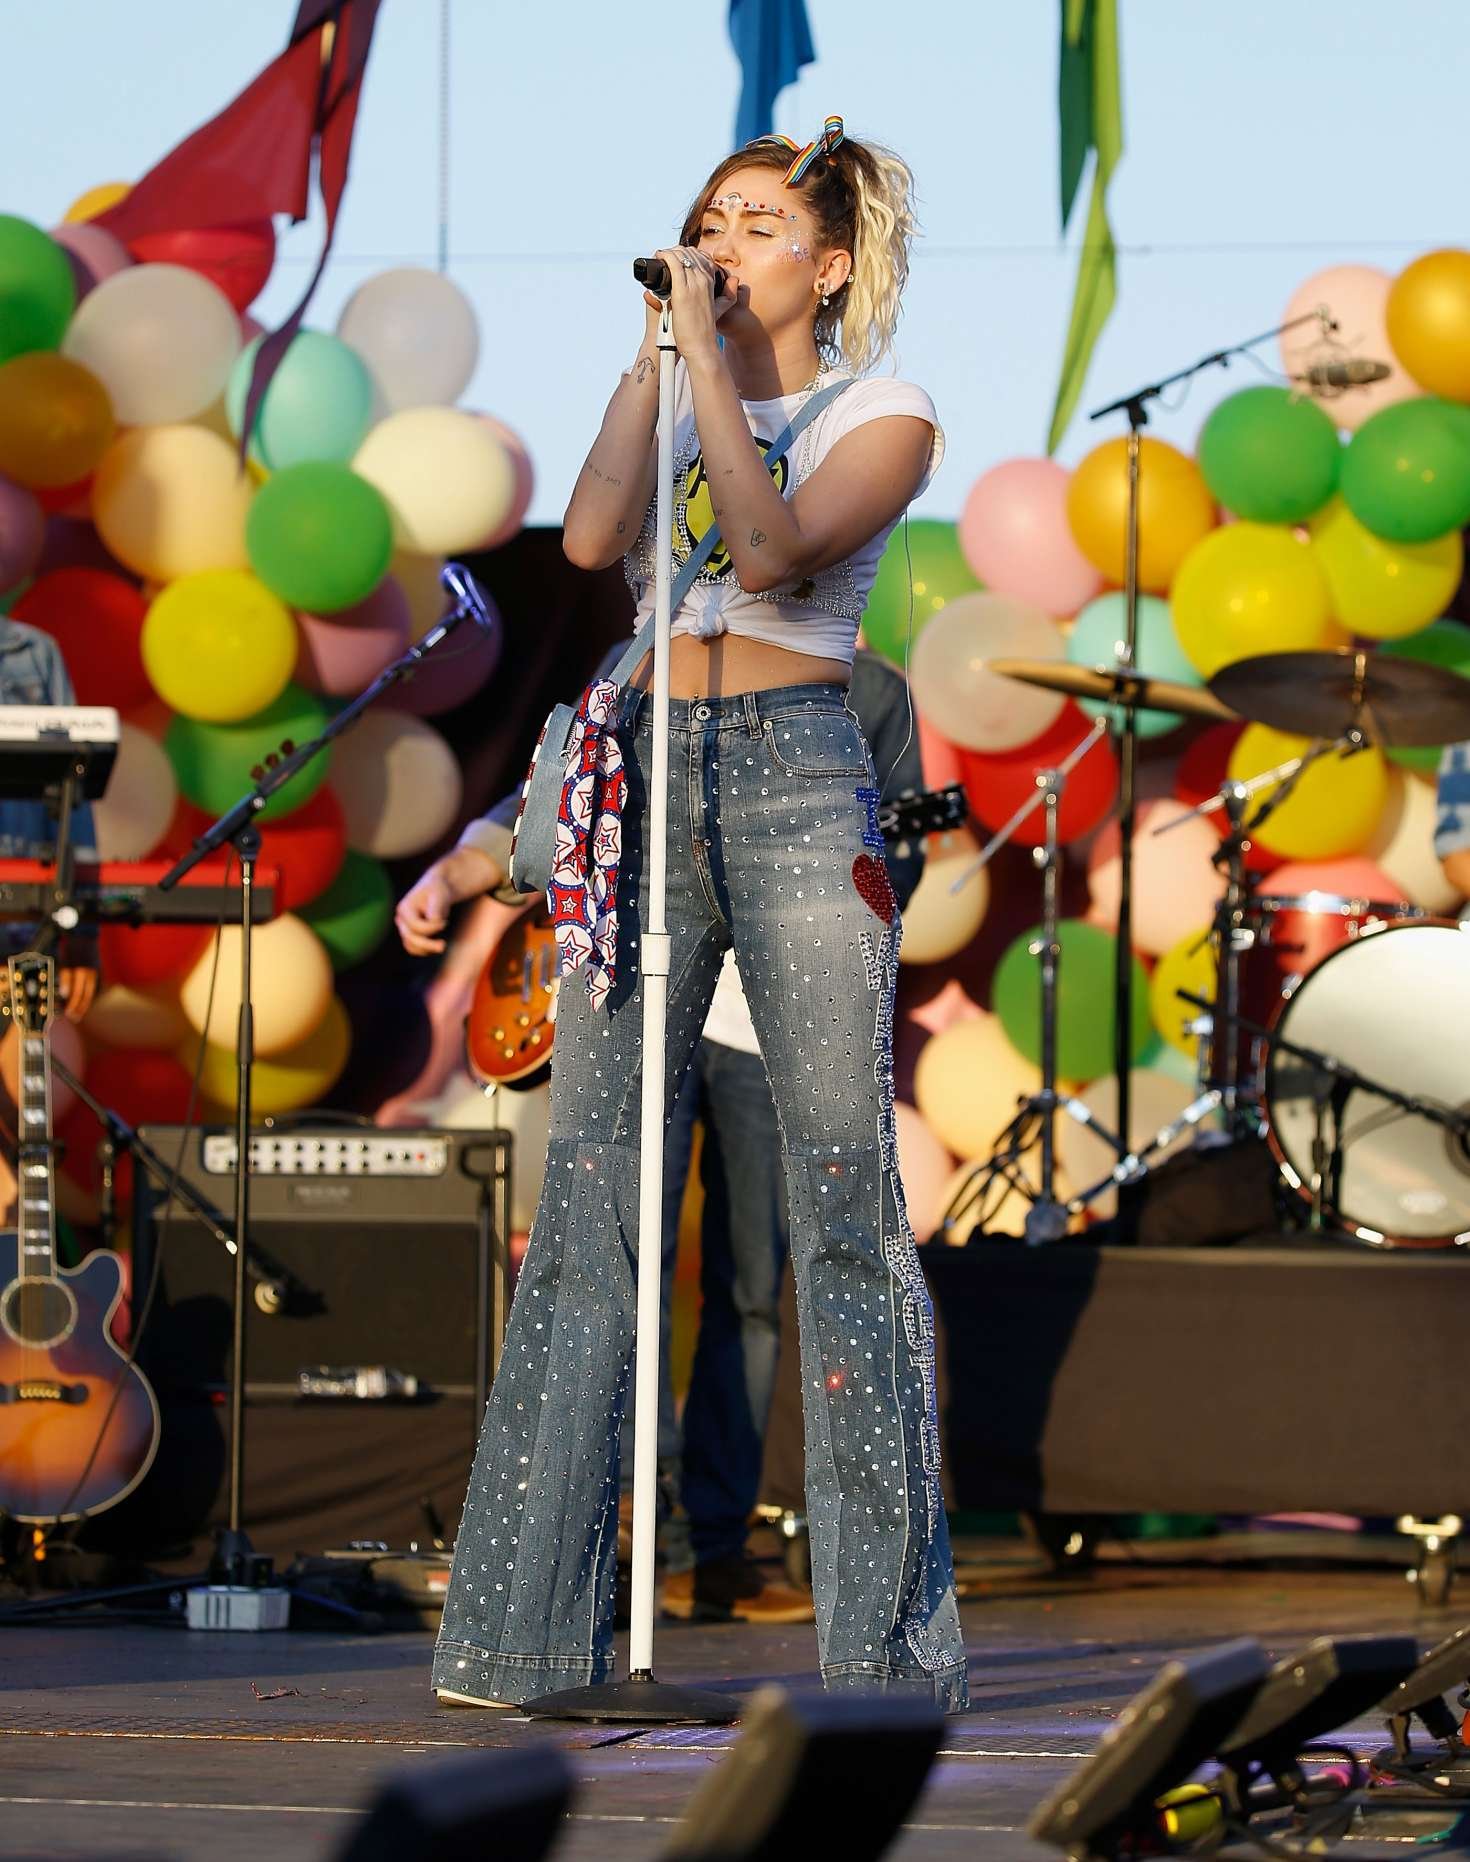 Miley Cyrus performs at Capital Pride 2017 Concert on June 11, 2017 ©GotCeleb